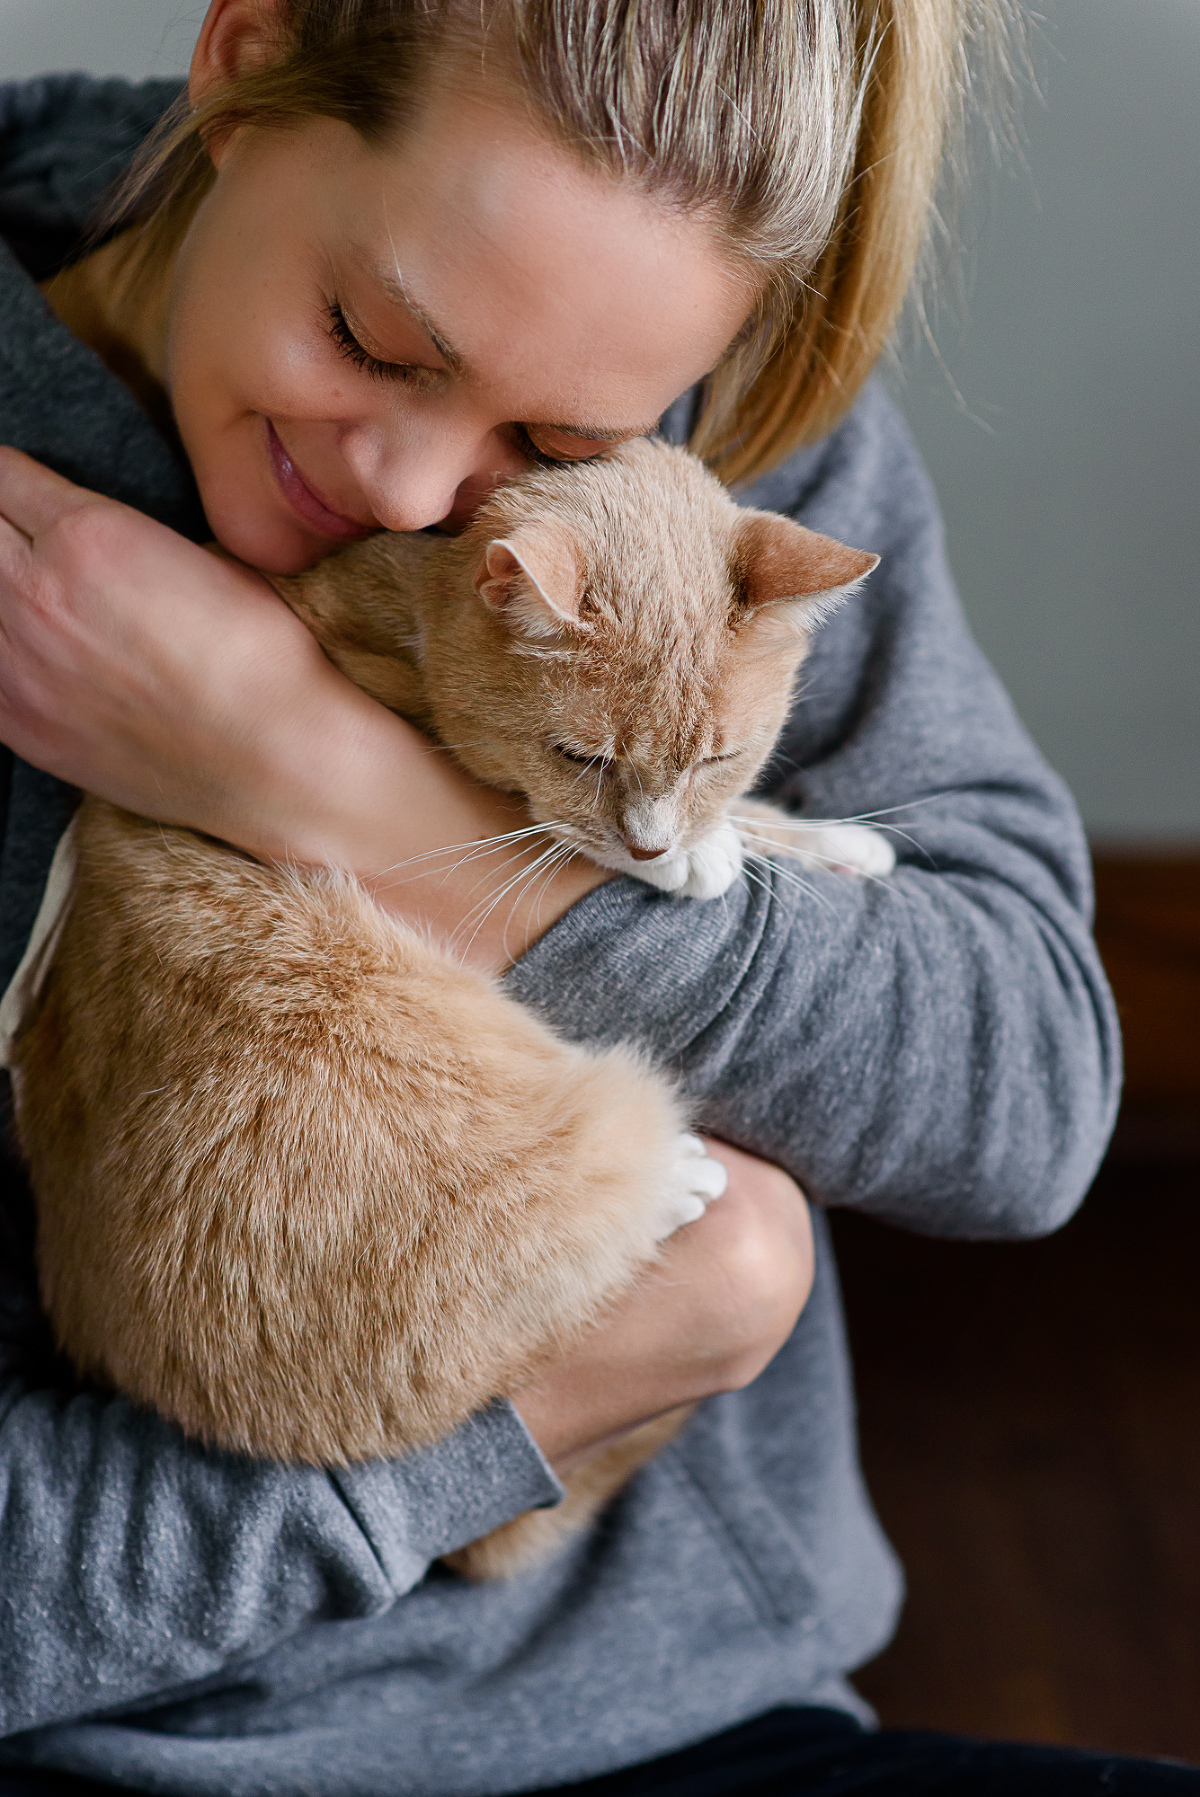 Leigh of Lavender Leigh Photography and her cat, Petey